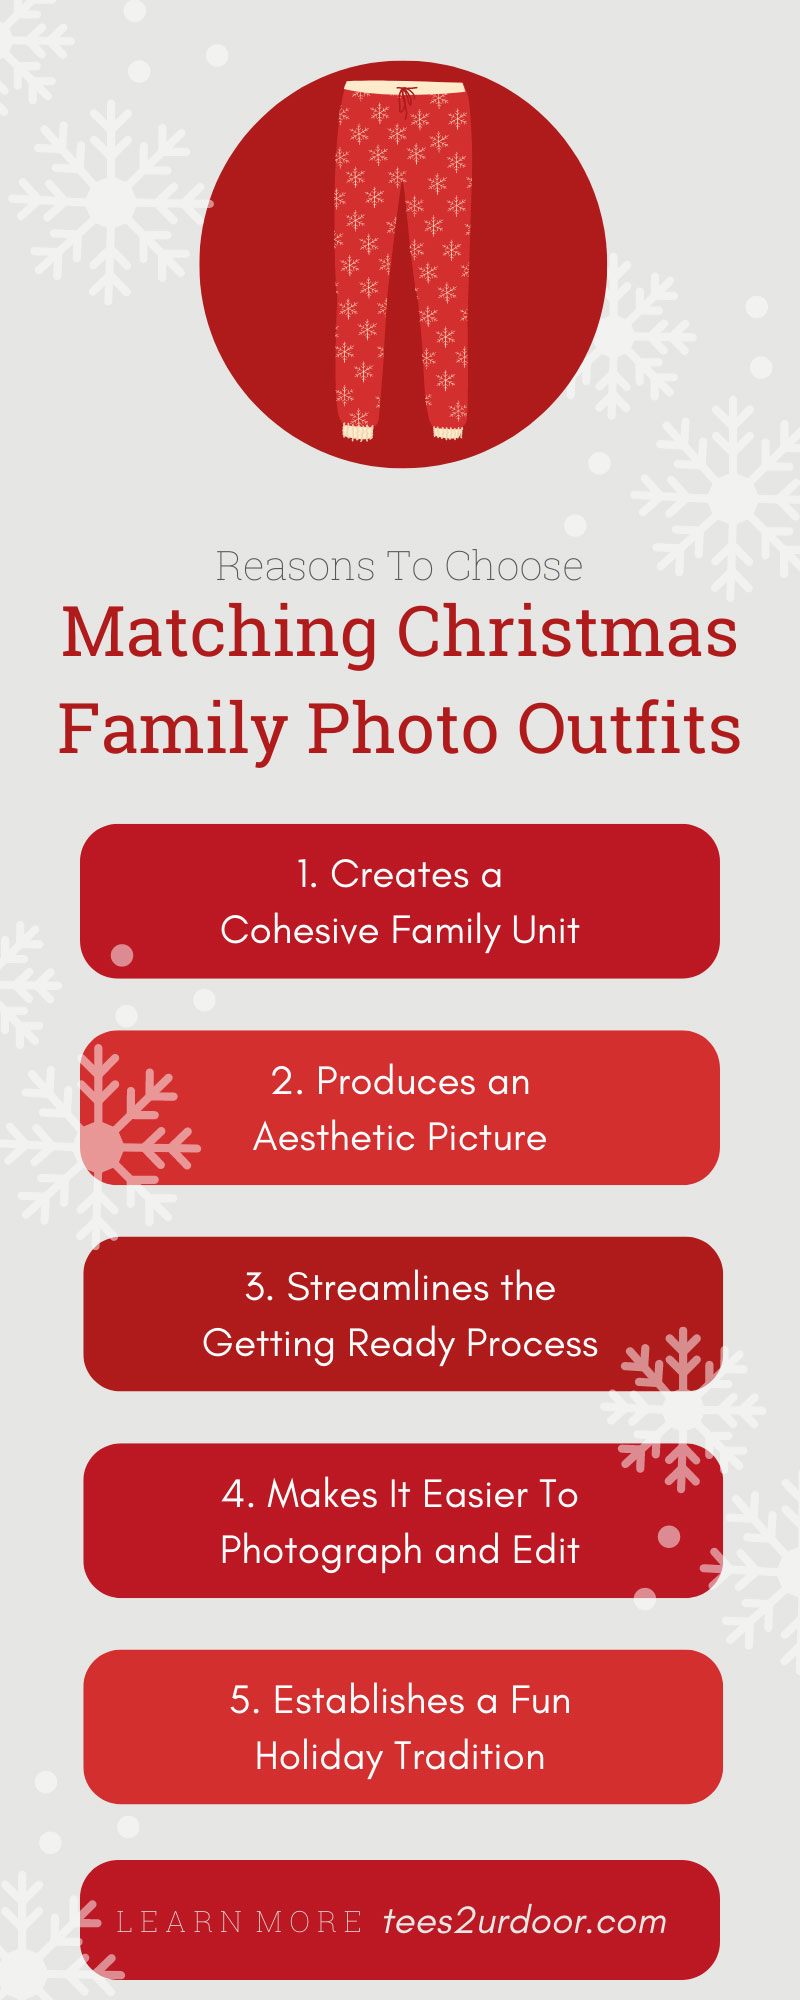 6 Reasons To Choose Matching Christmas Family Photo Outfits